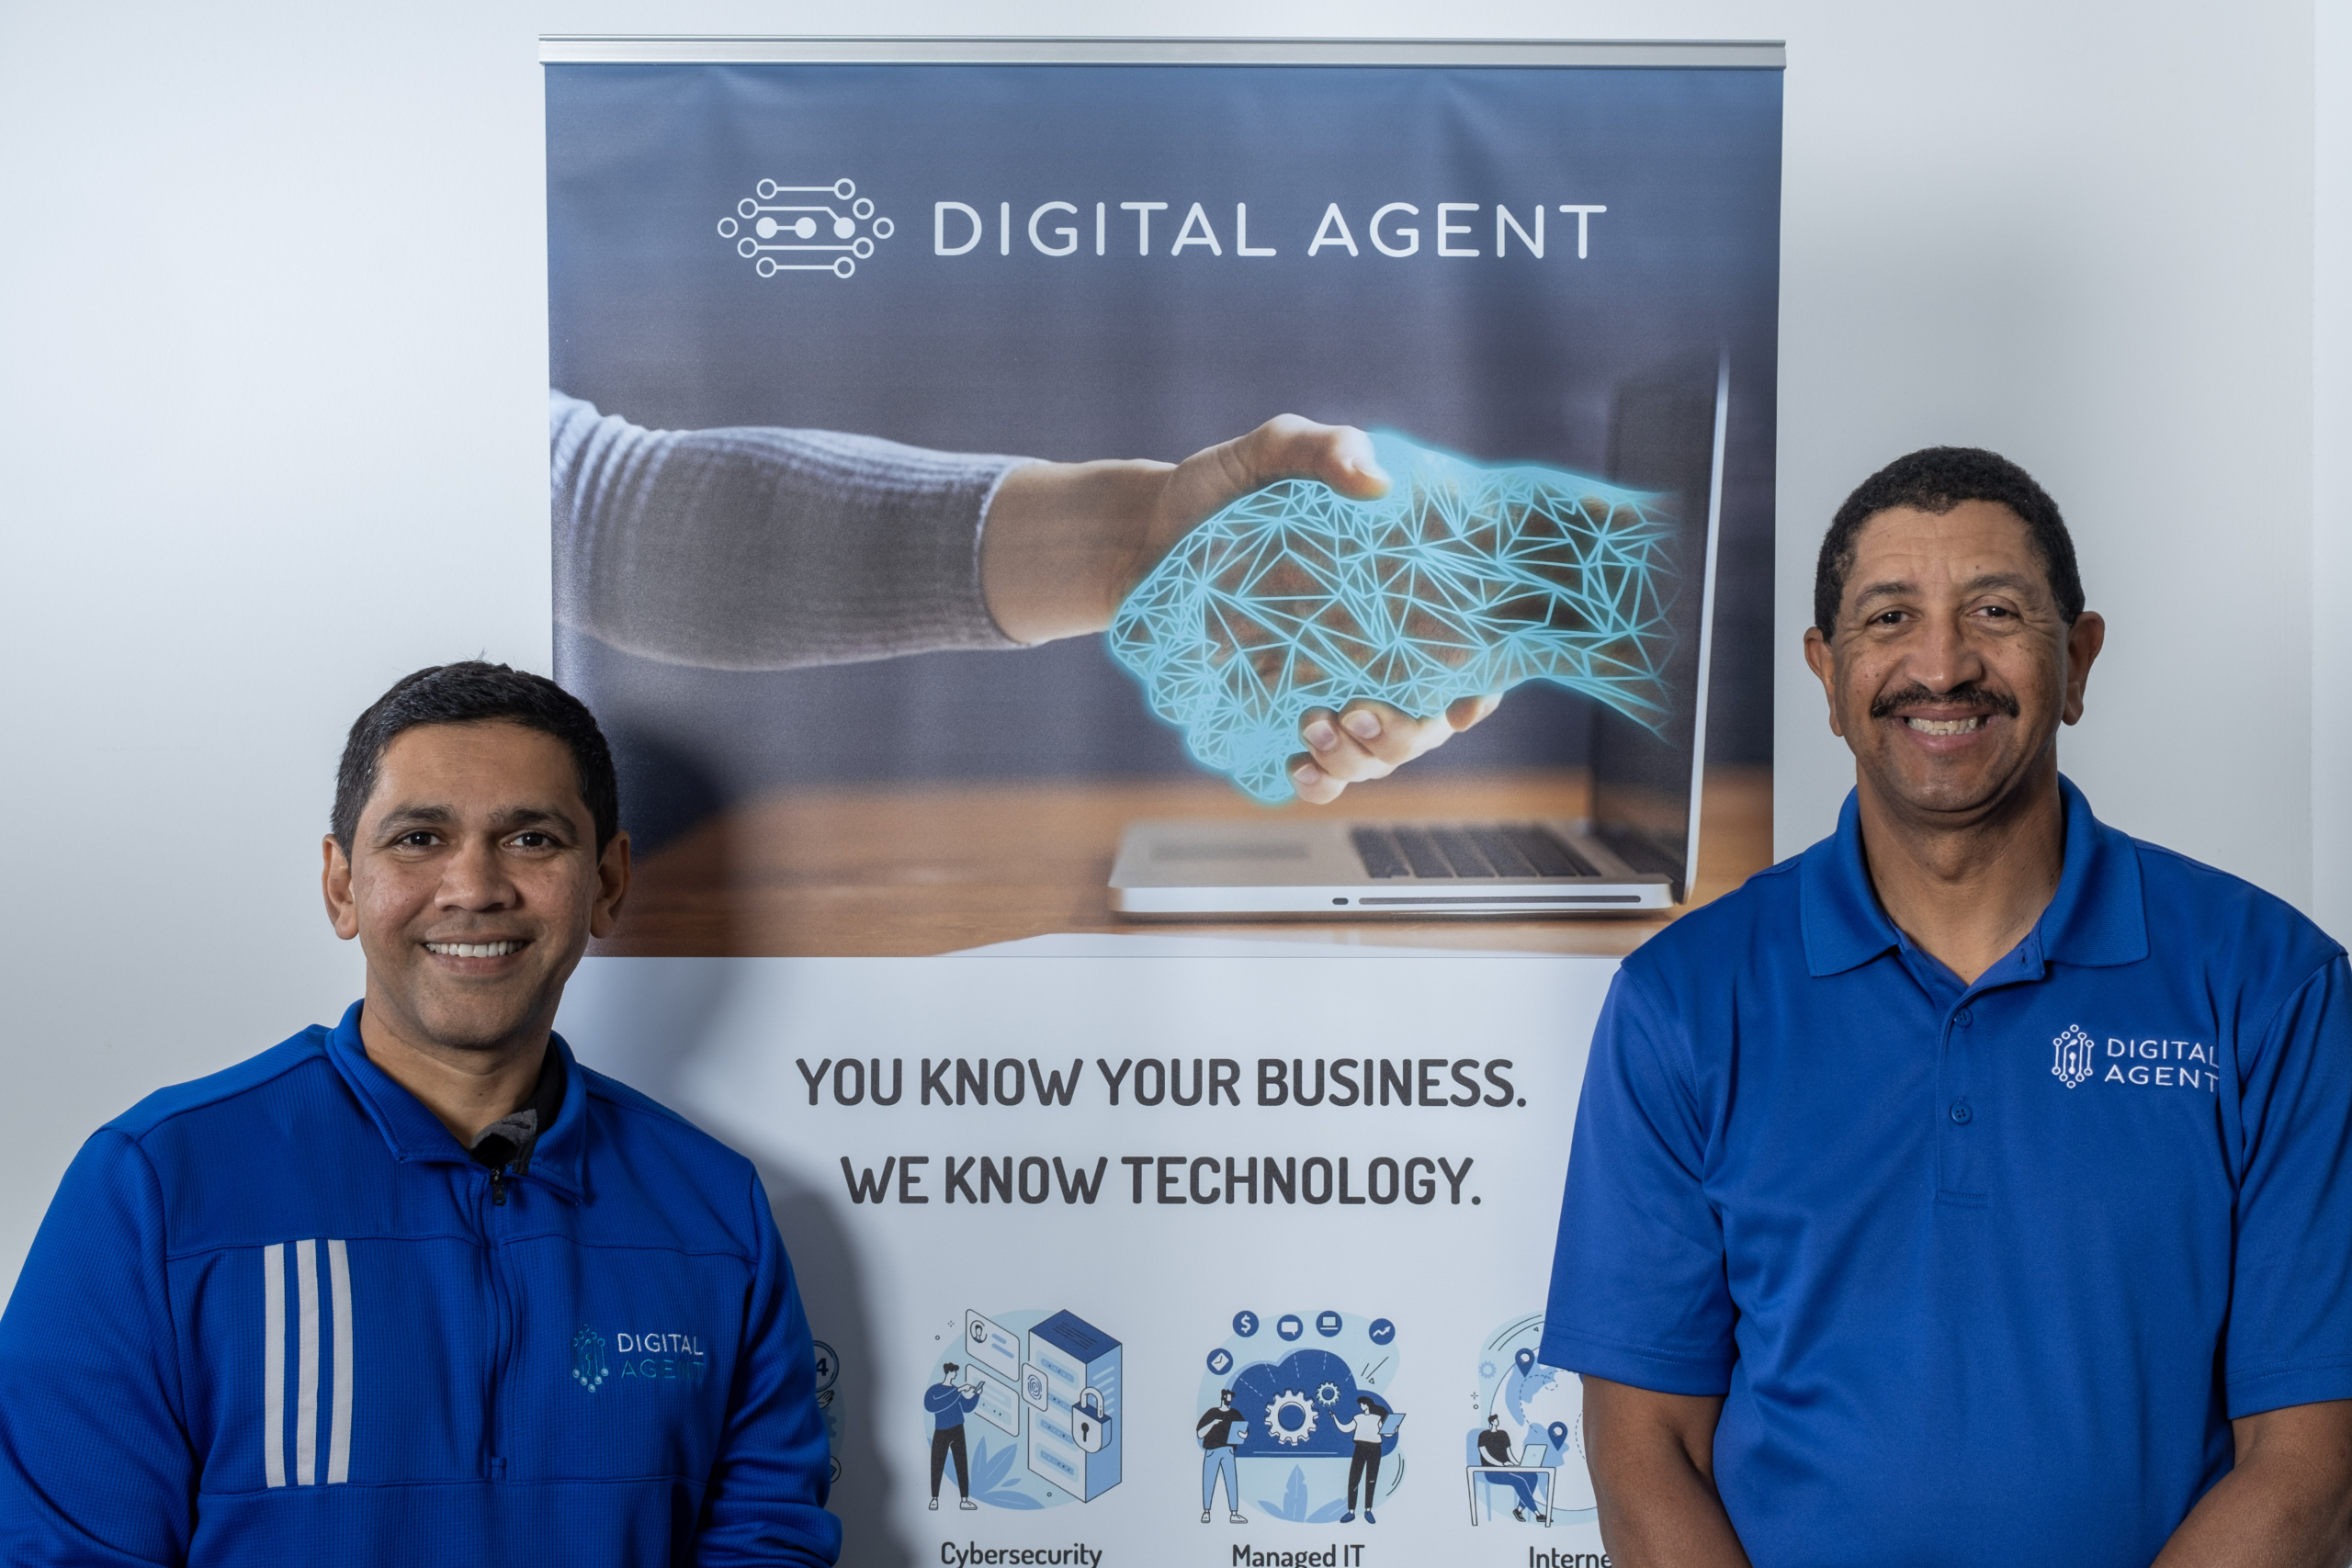 Digital Agent has been serving businesses as a phone, internet, managed IT, and cybersecurity provider for over 25 years.